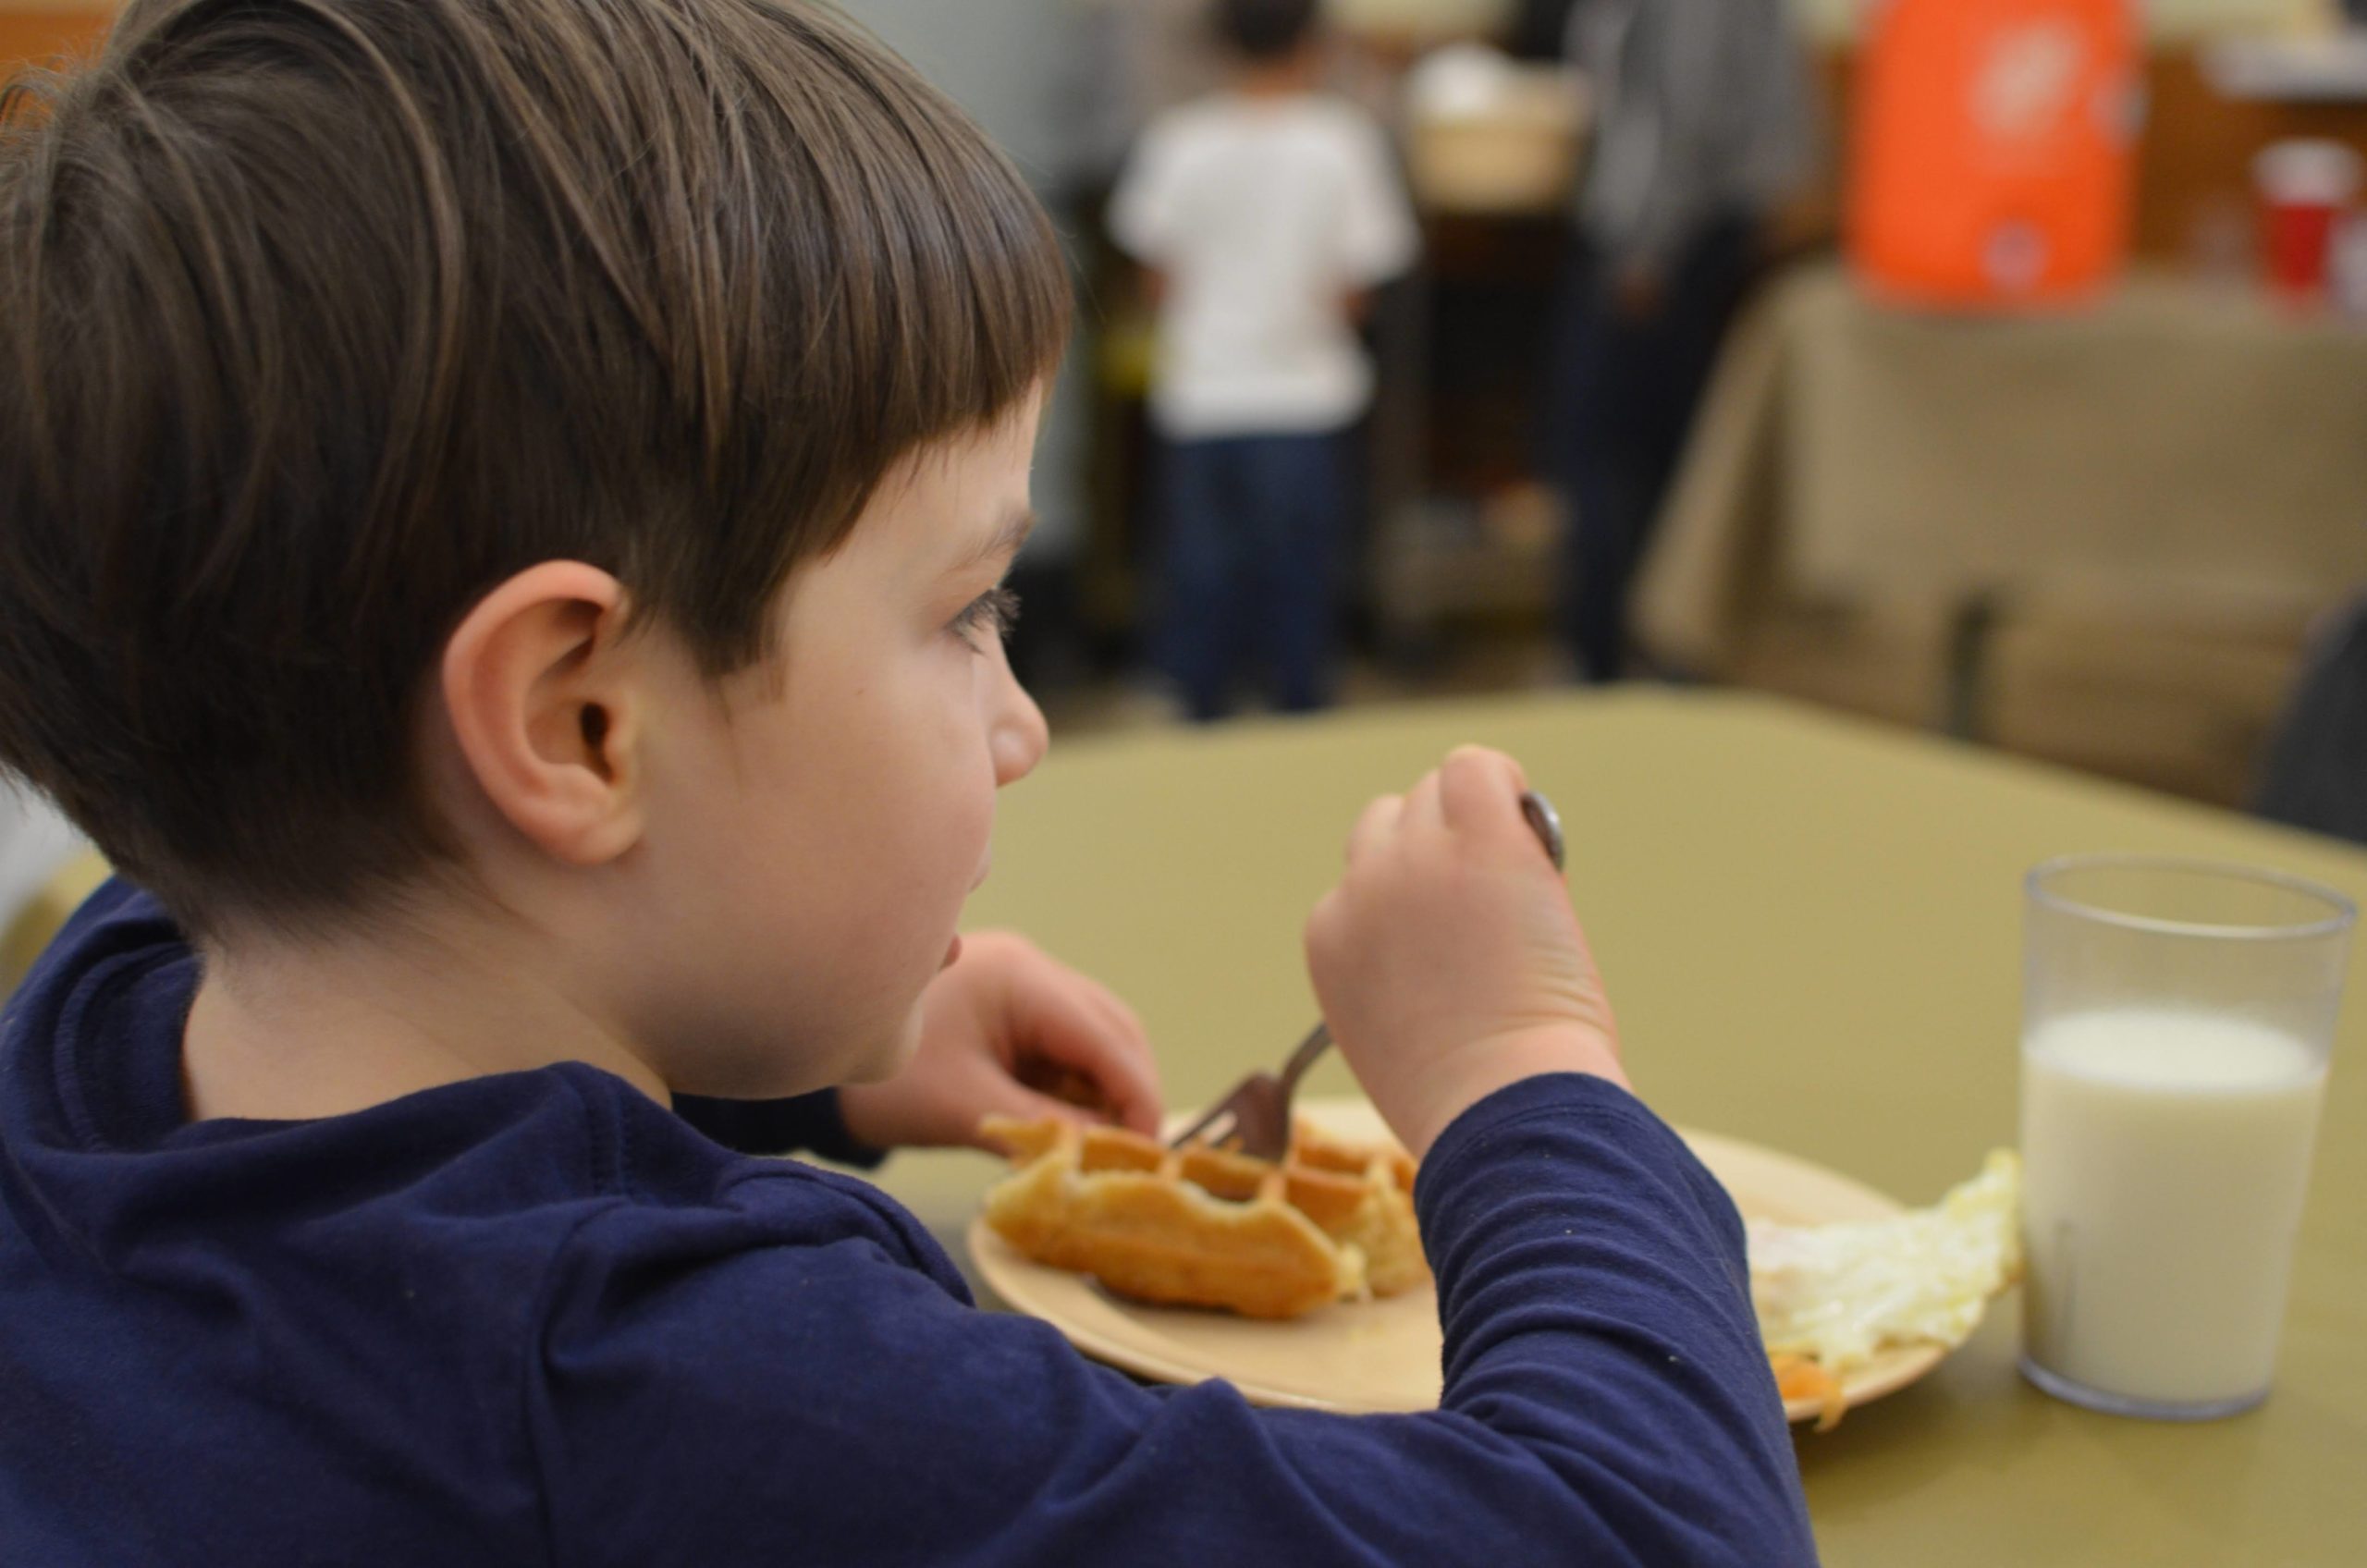 A 5-year-old kid sits at a table eating a waffle, eggs, and a glass of milk